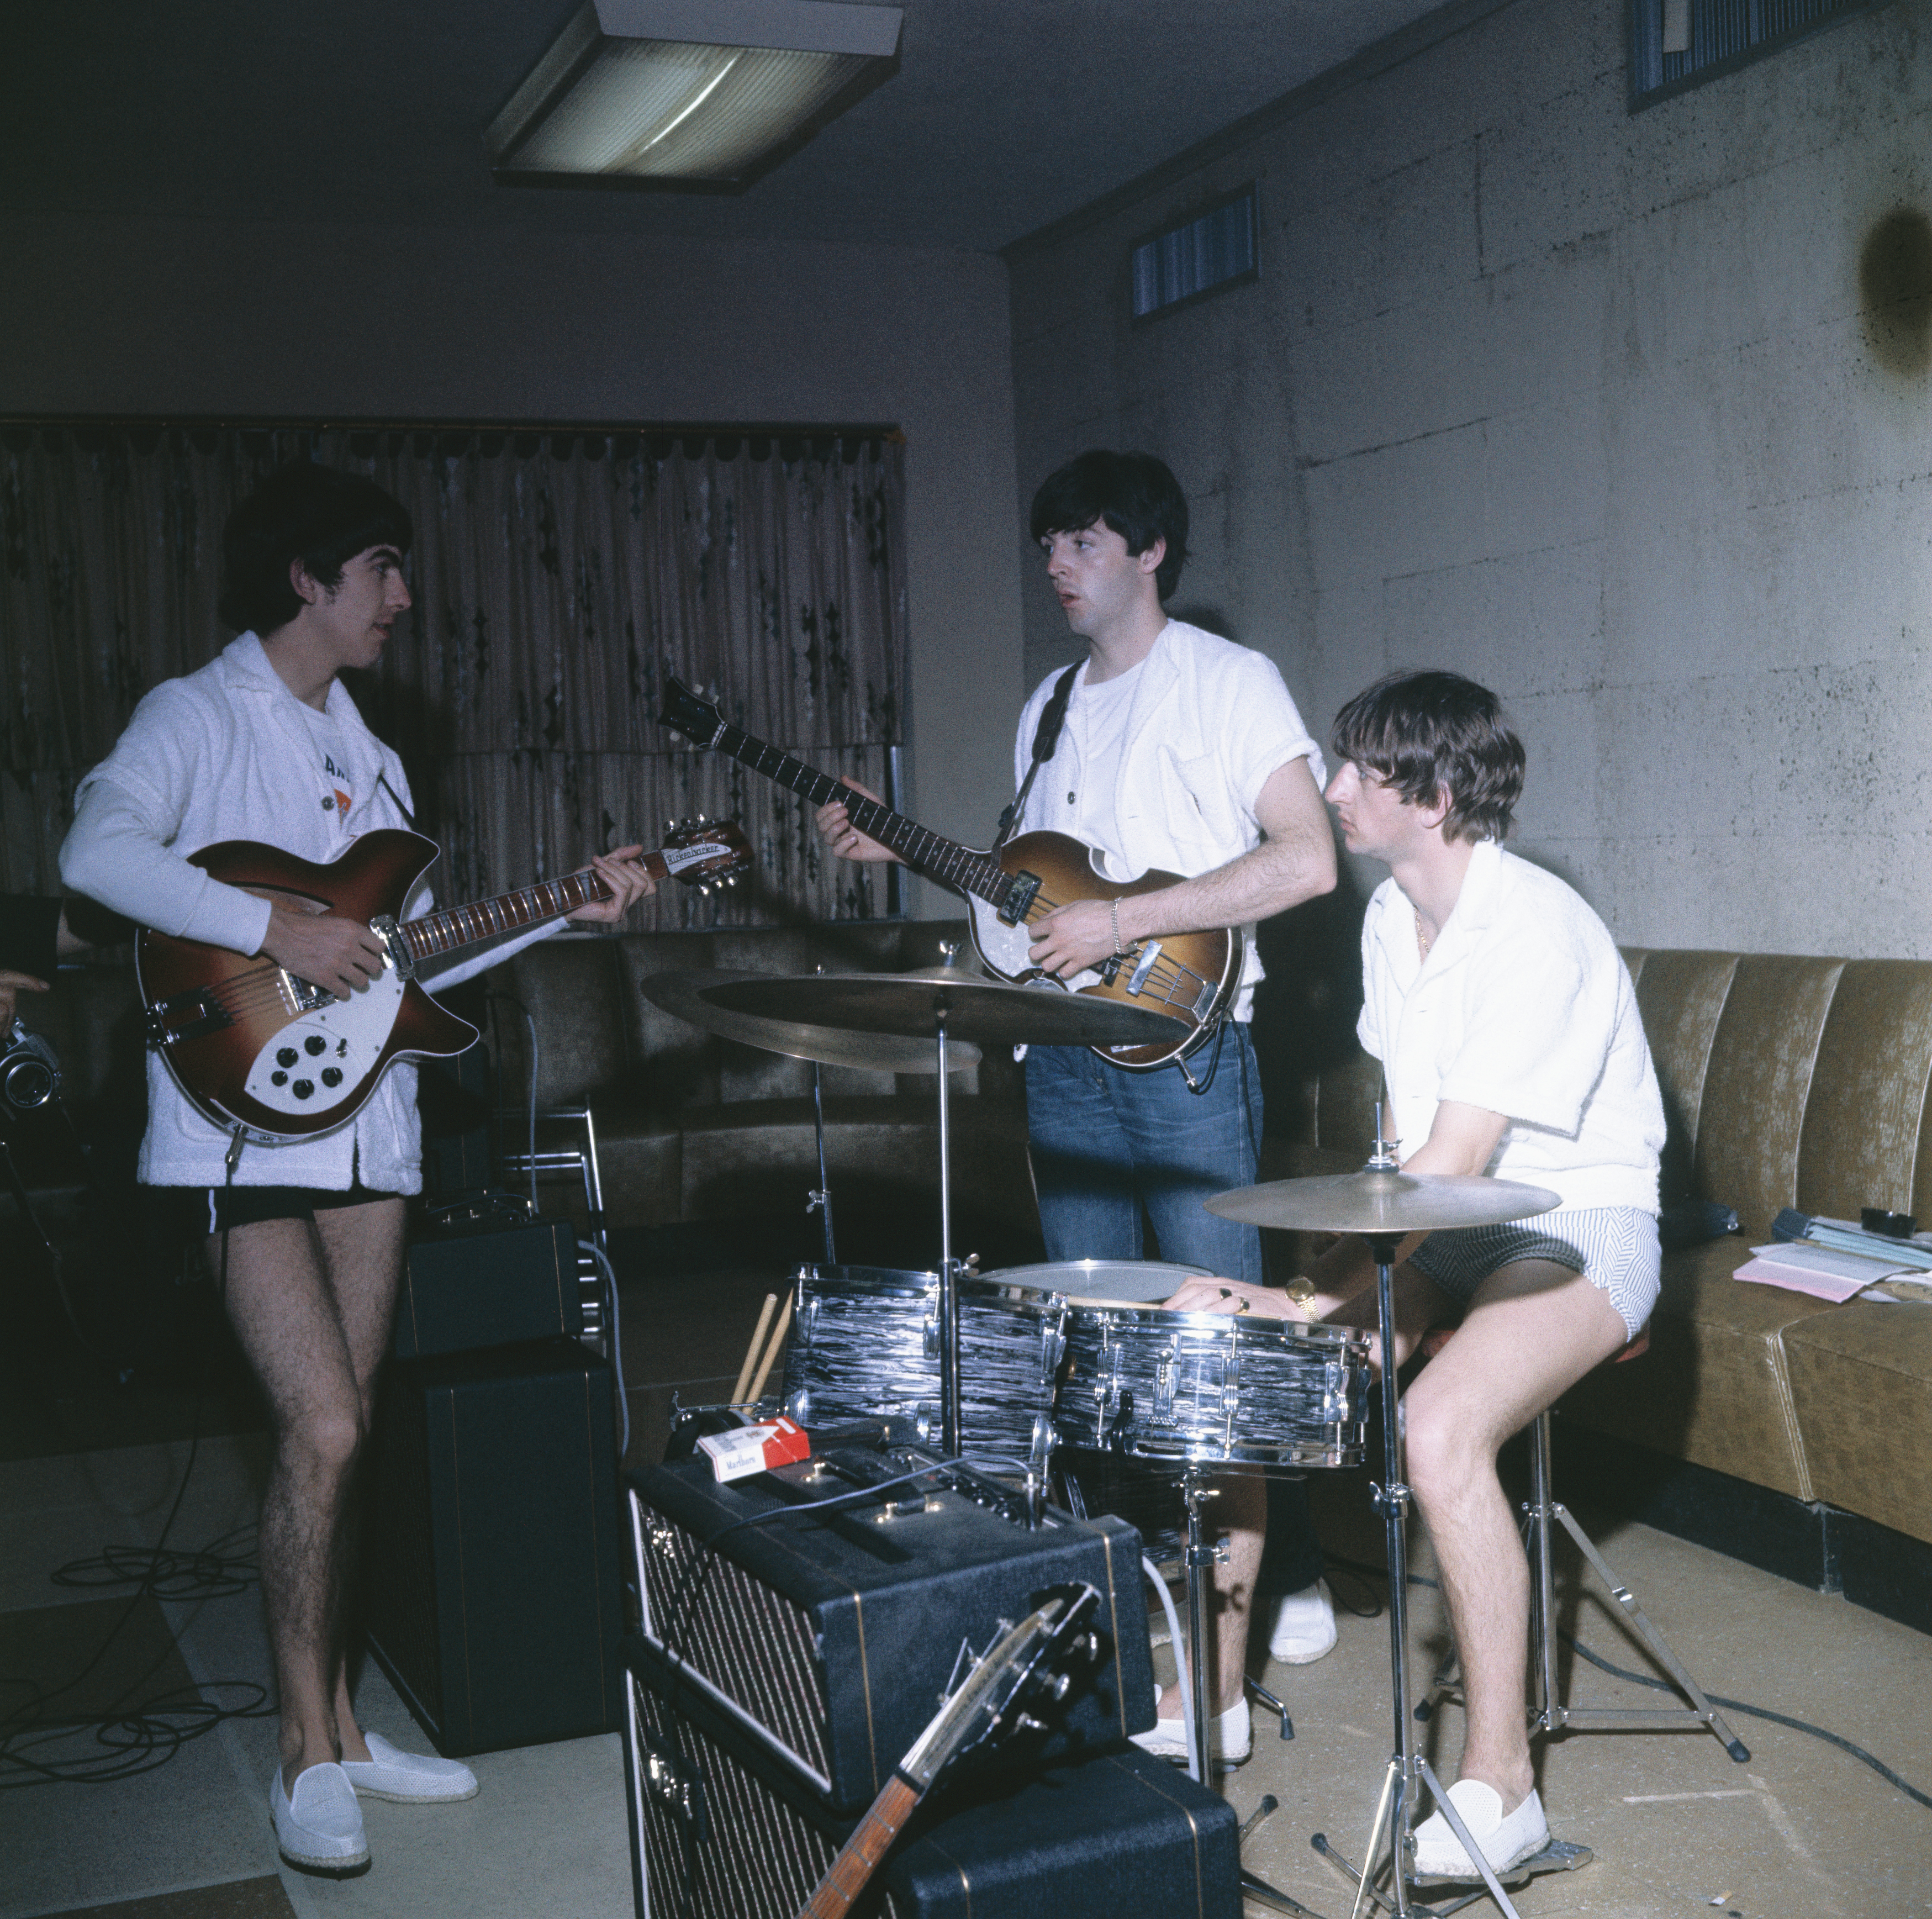 (Original Caption) Miami Beach, Fla.: The Beatles, in their bathing suits, rehearse at the Twoville Hotel for their next appearance on the Sullivan TV show.